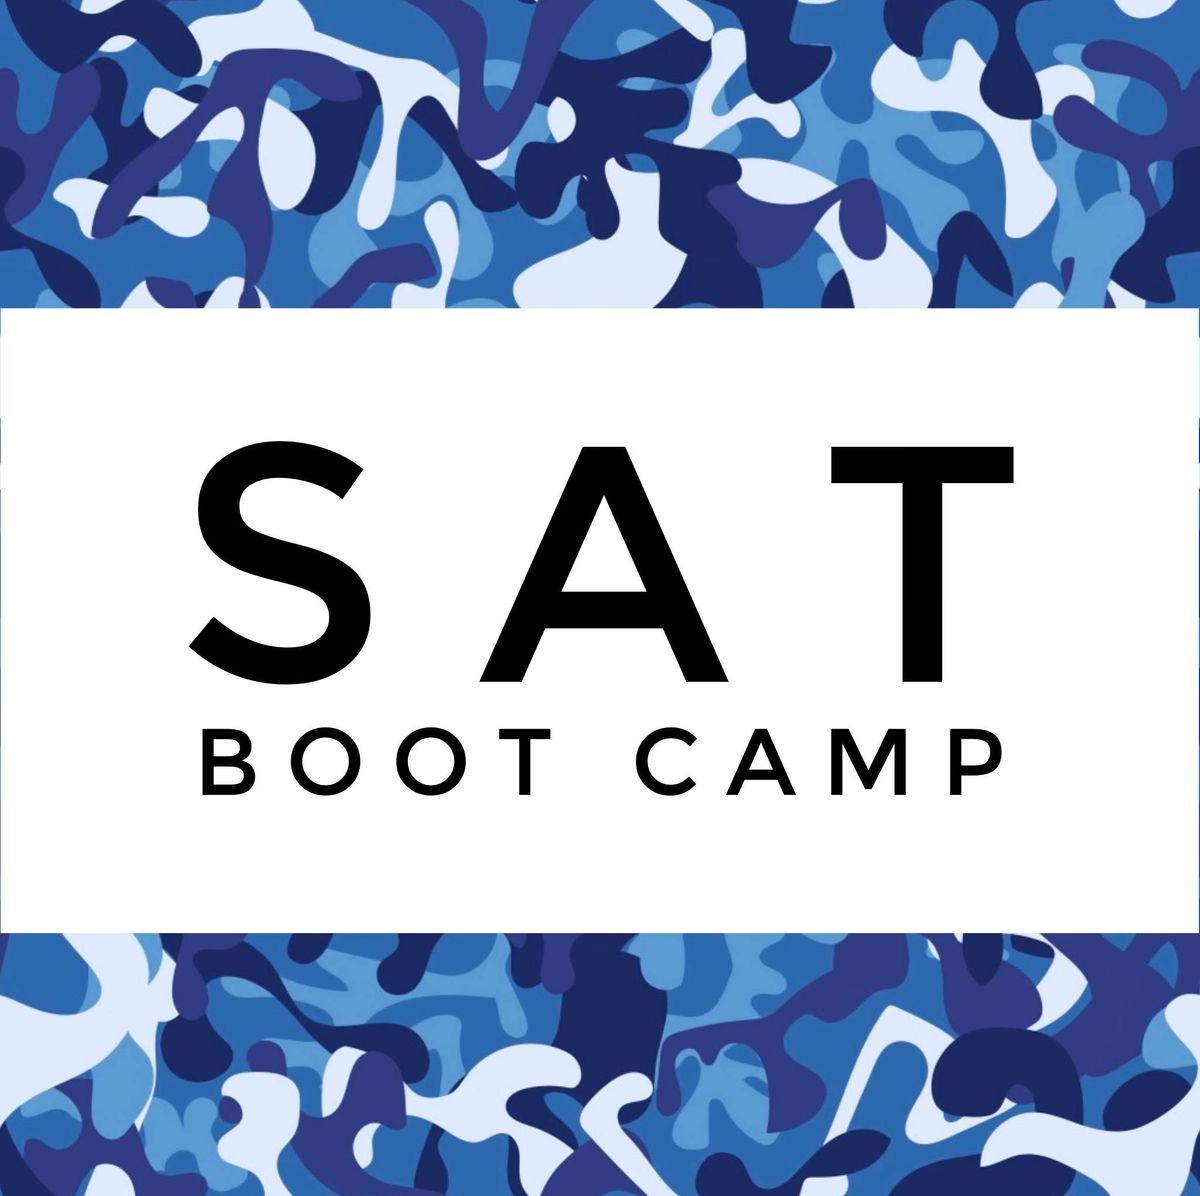 SAT  BOOT CAMP - 4 Day Session! (Tuesday, May 28th through Friday, May 31st, 1:00pm - 4:00pm)